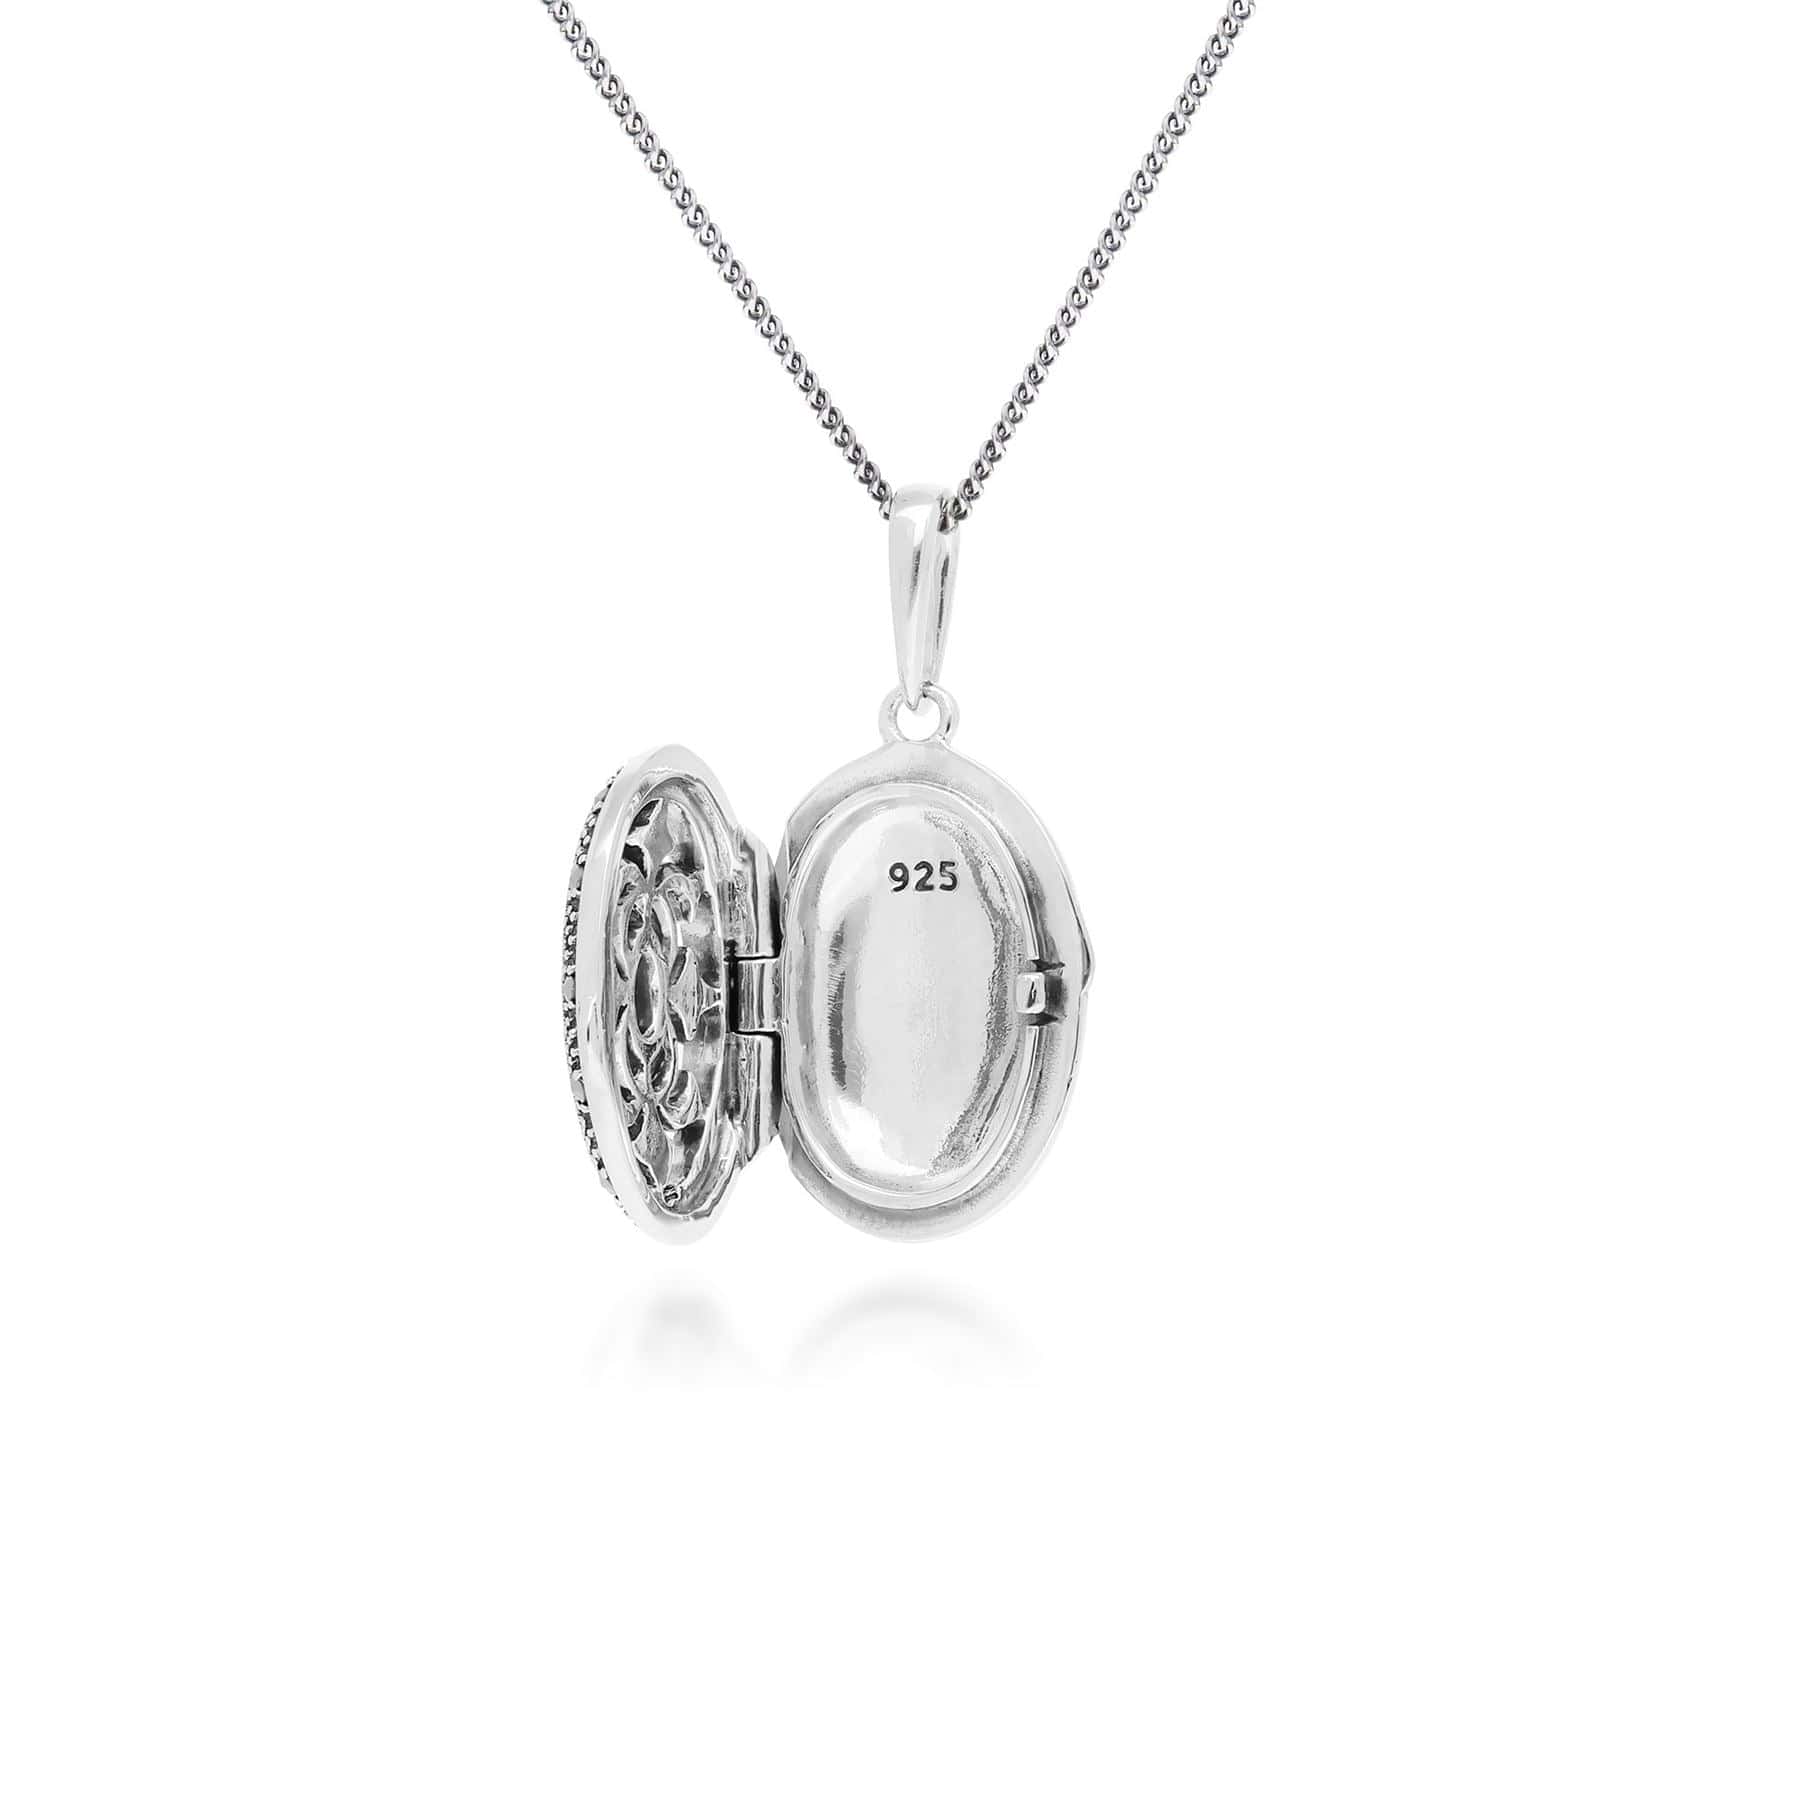 214N716206925 Art Nouveau Style Oval Aquamarine & Marcasite Locket Necklace in 925 Sterling Silver 3